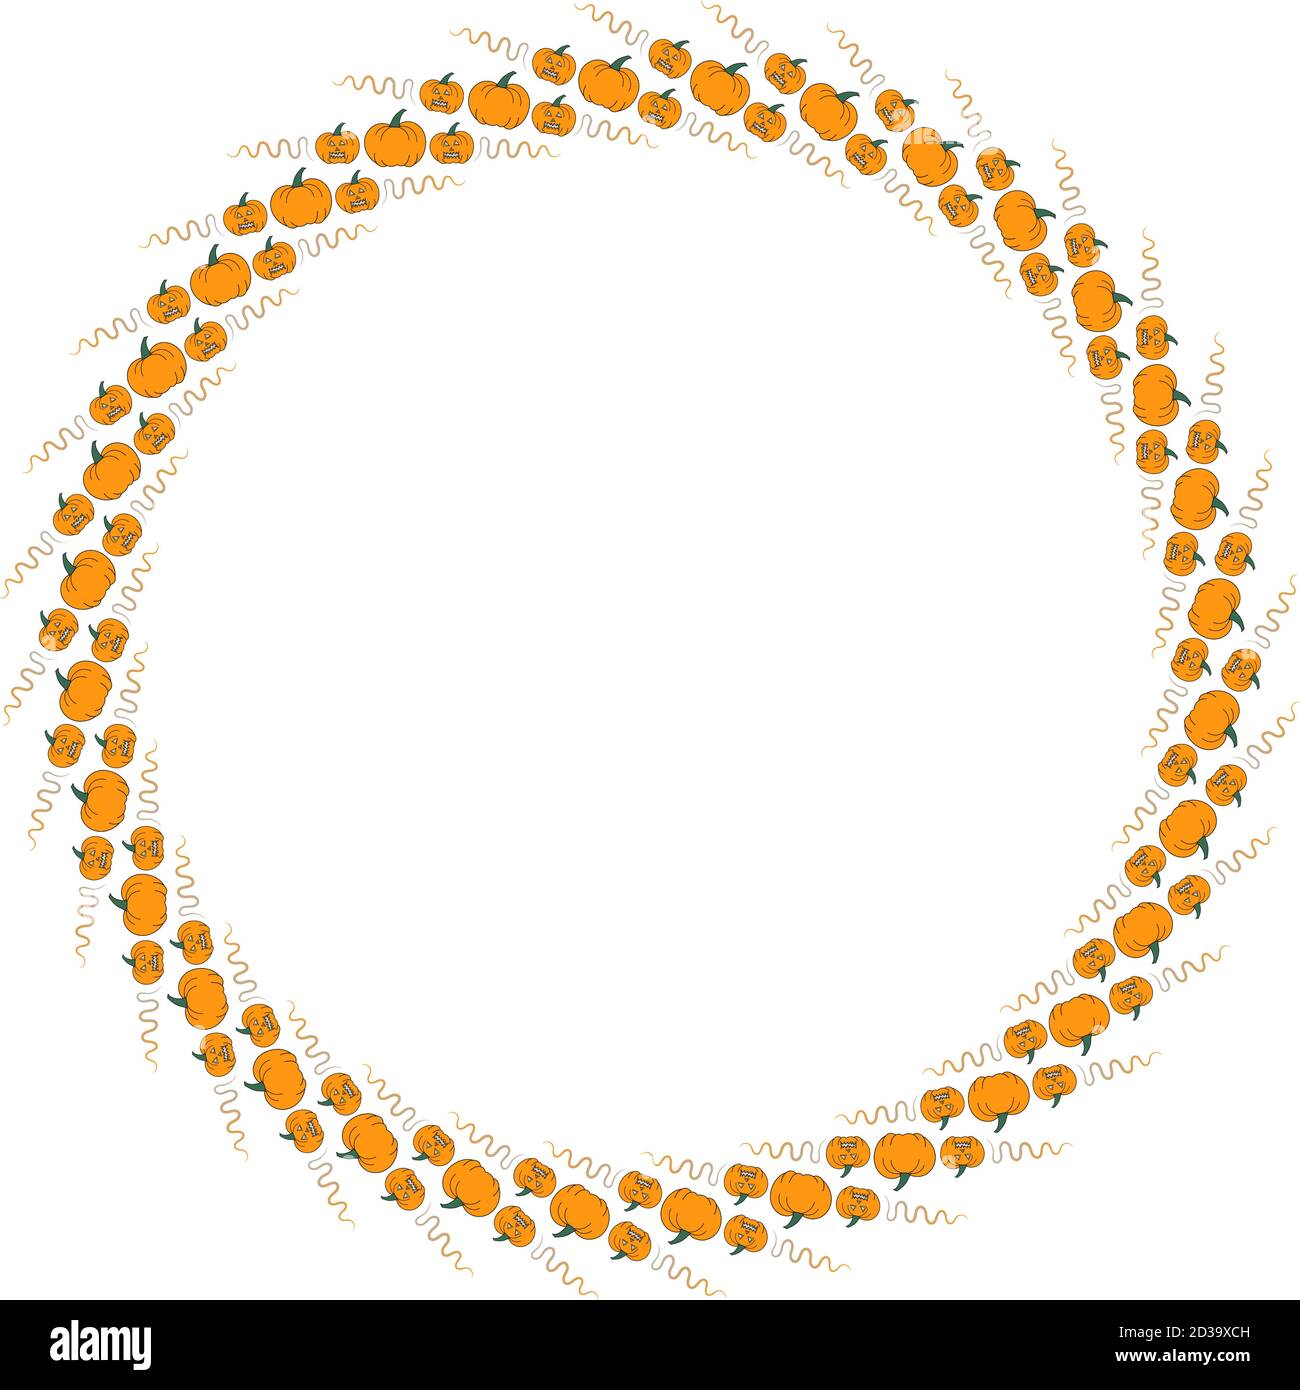 Orange circle frame with halloween and thanksgiving pumpkins Stock Vector